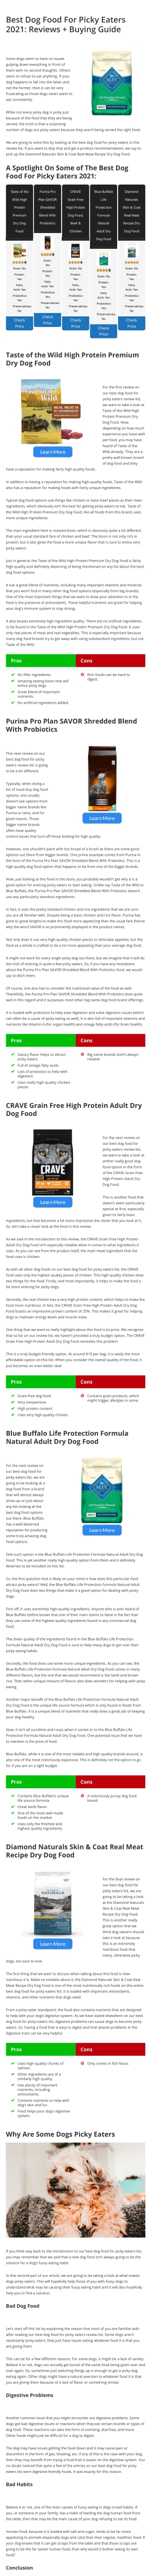 Best Dog Food For Picky Eaters 2021: Reviews   Buying Guide